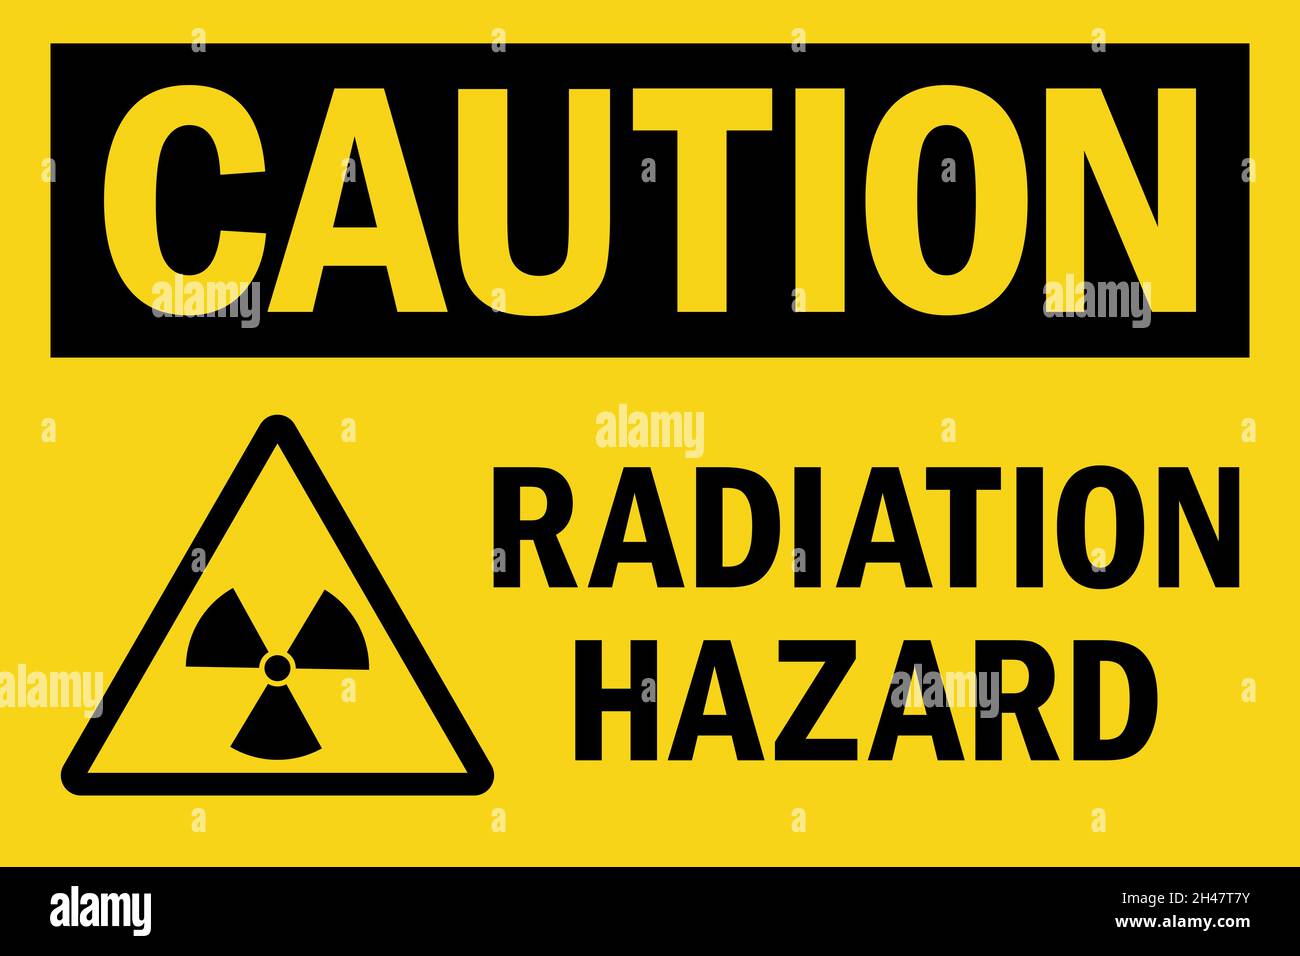 Radiation hazard caution sign. Black on yellow background. Safety signs and symbols. Stock Vector